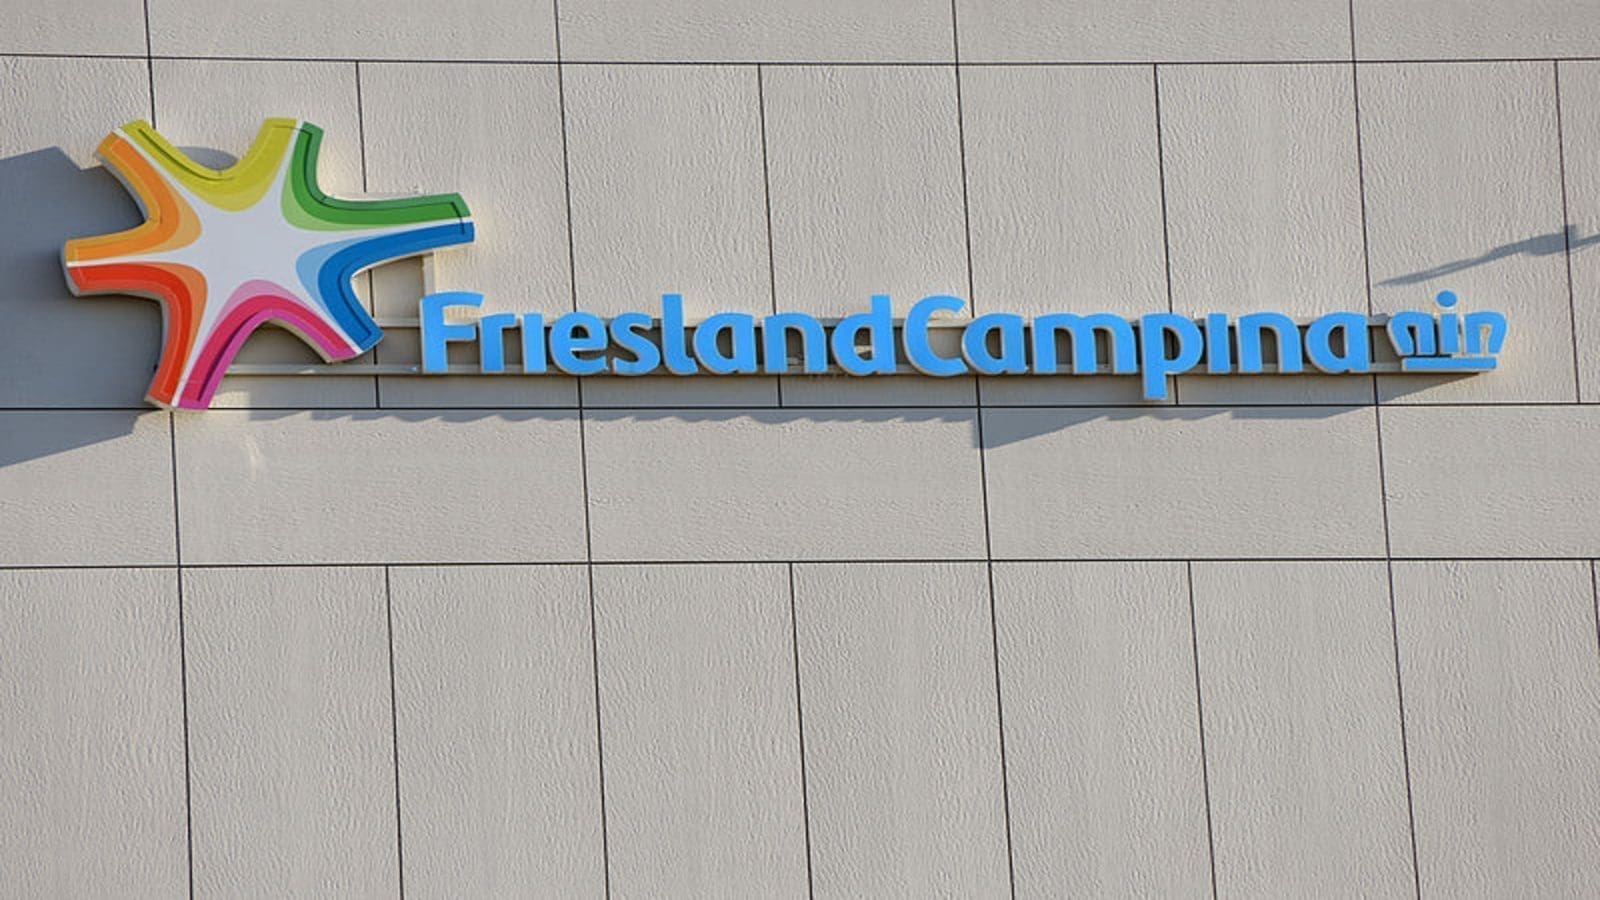 FrieslandCampina posts 19.4% revenue growth in first half of 2022